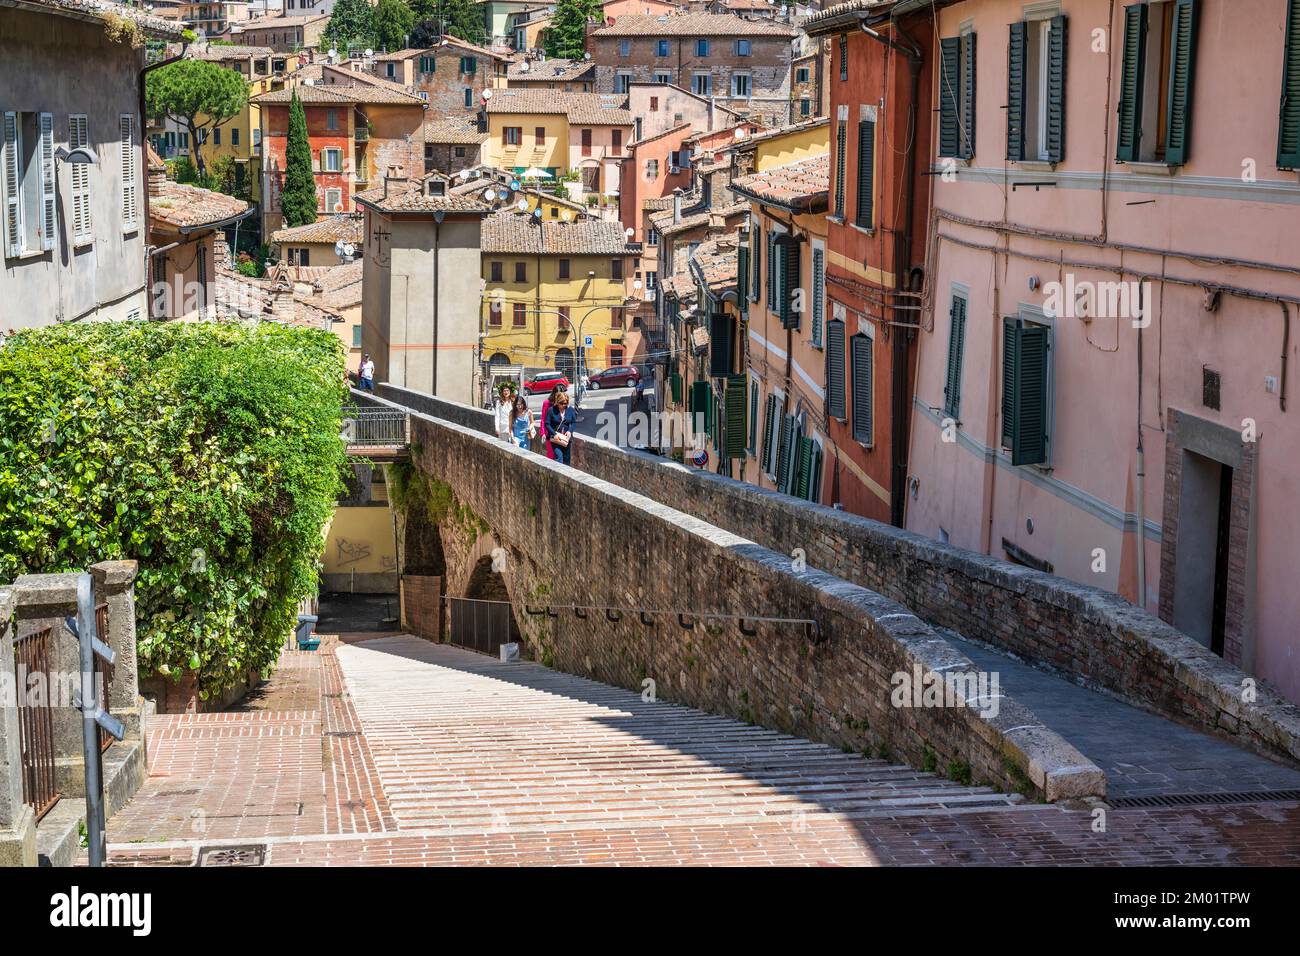 Colourful building beside the medieval aqueduct (Via dell'Acquedotto) in Perugia, Umbria, Italy Stock Photo